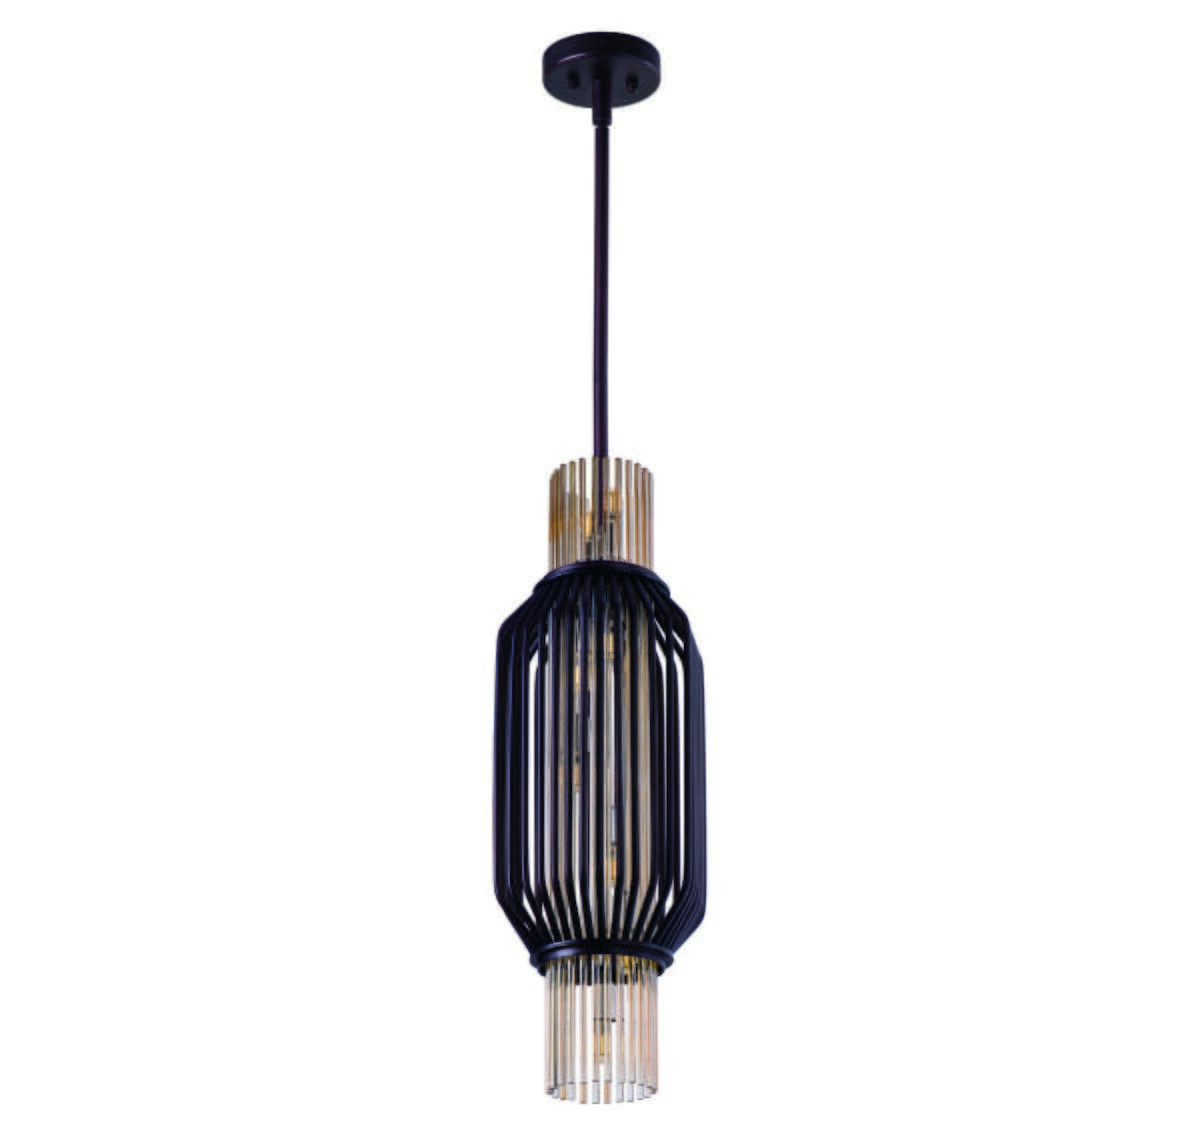 Aviary 9.5"" 8-Light Wall Sconce in Oil Rubbed Bronze -  Maxim Lighting, 38483CGOI